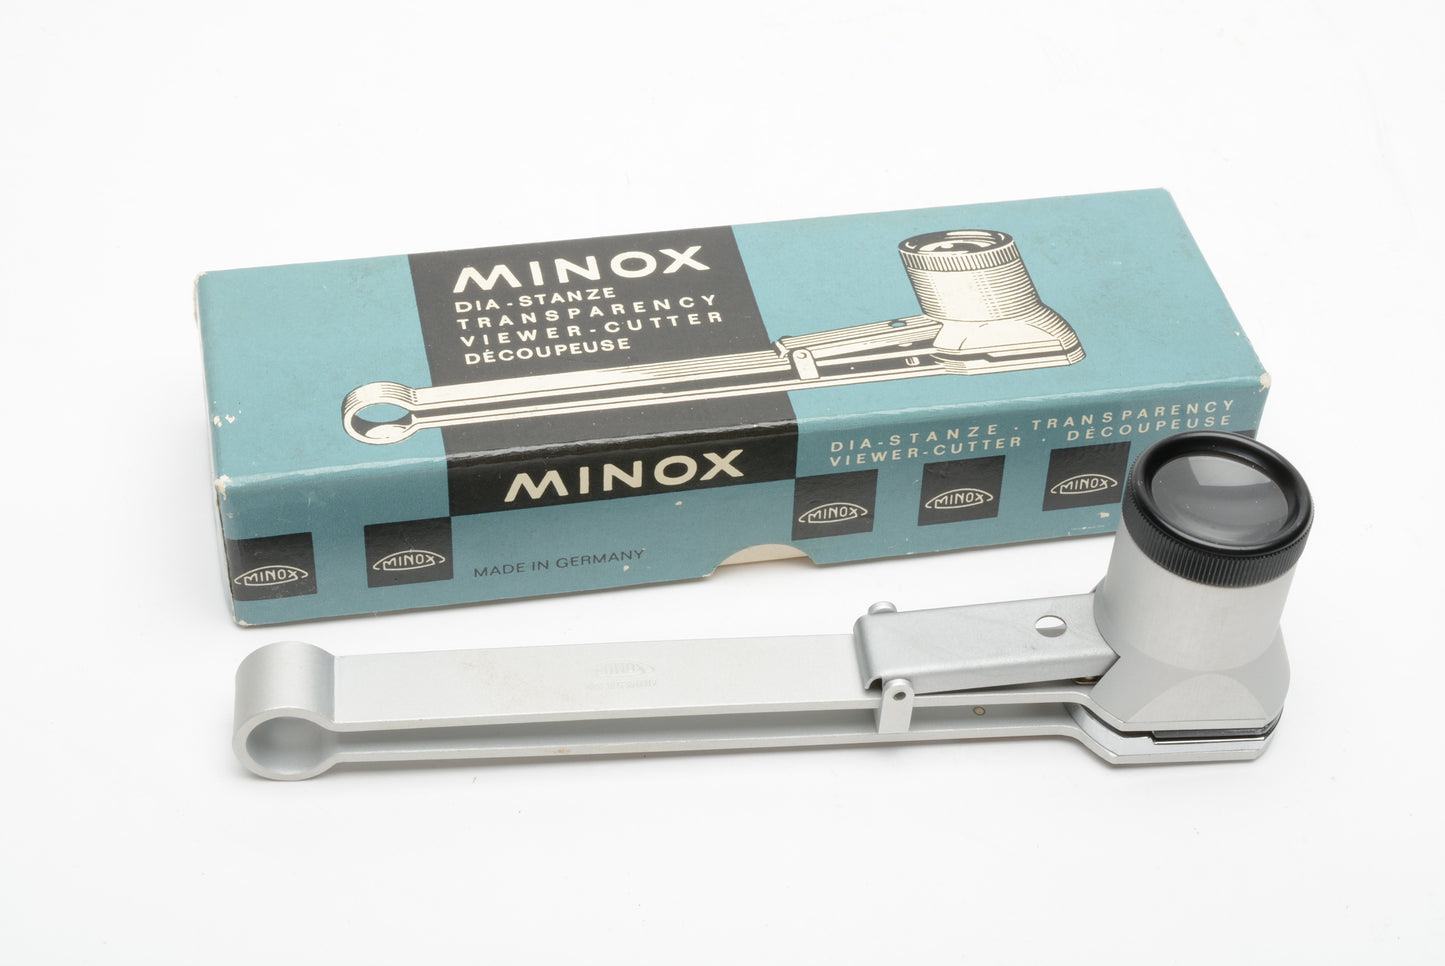 Minox Dia-Stanze transparency viewer for Model B, very clean, boxed